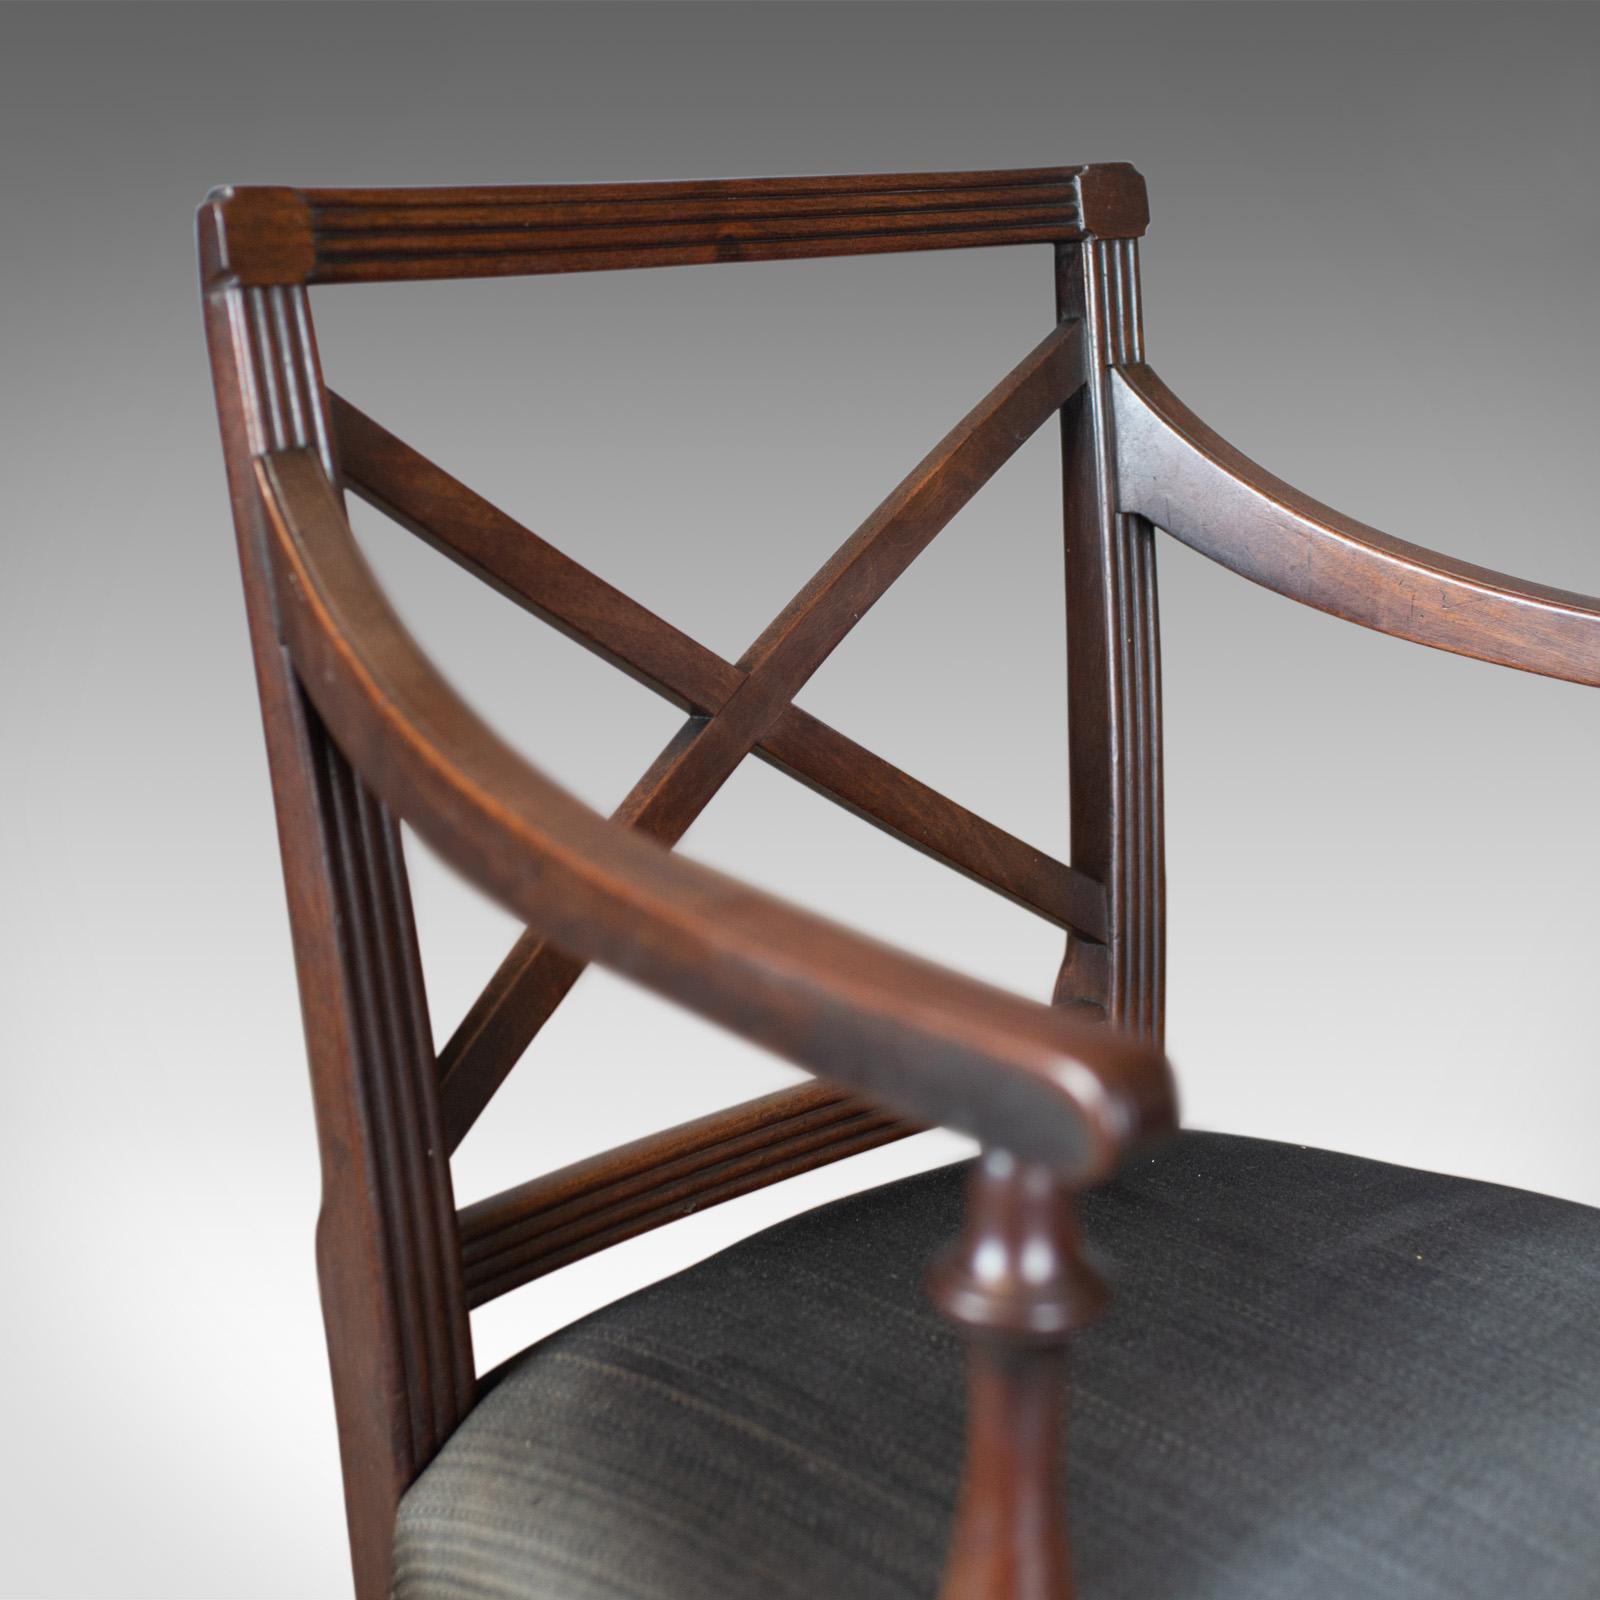 Mahogany 9 Antique Dining Chairs, 2 x Carvers, 6 Plus 1 Spare Side, Regency, circa 1815